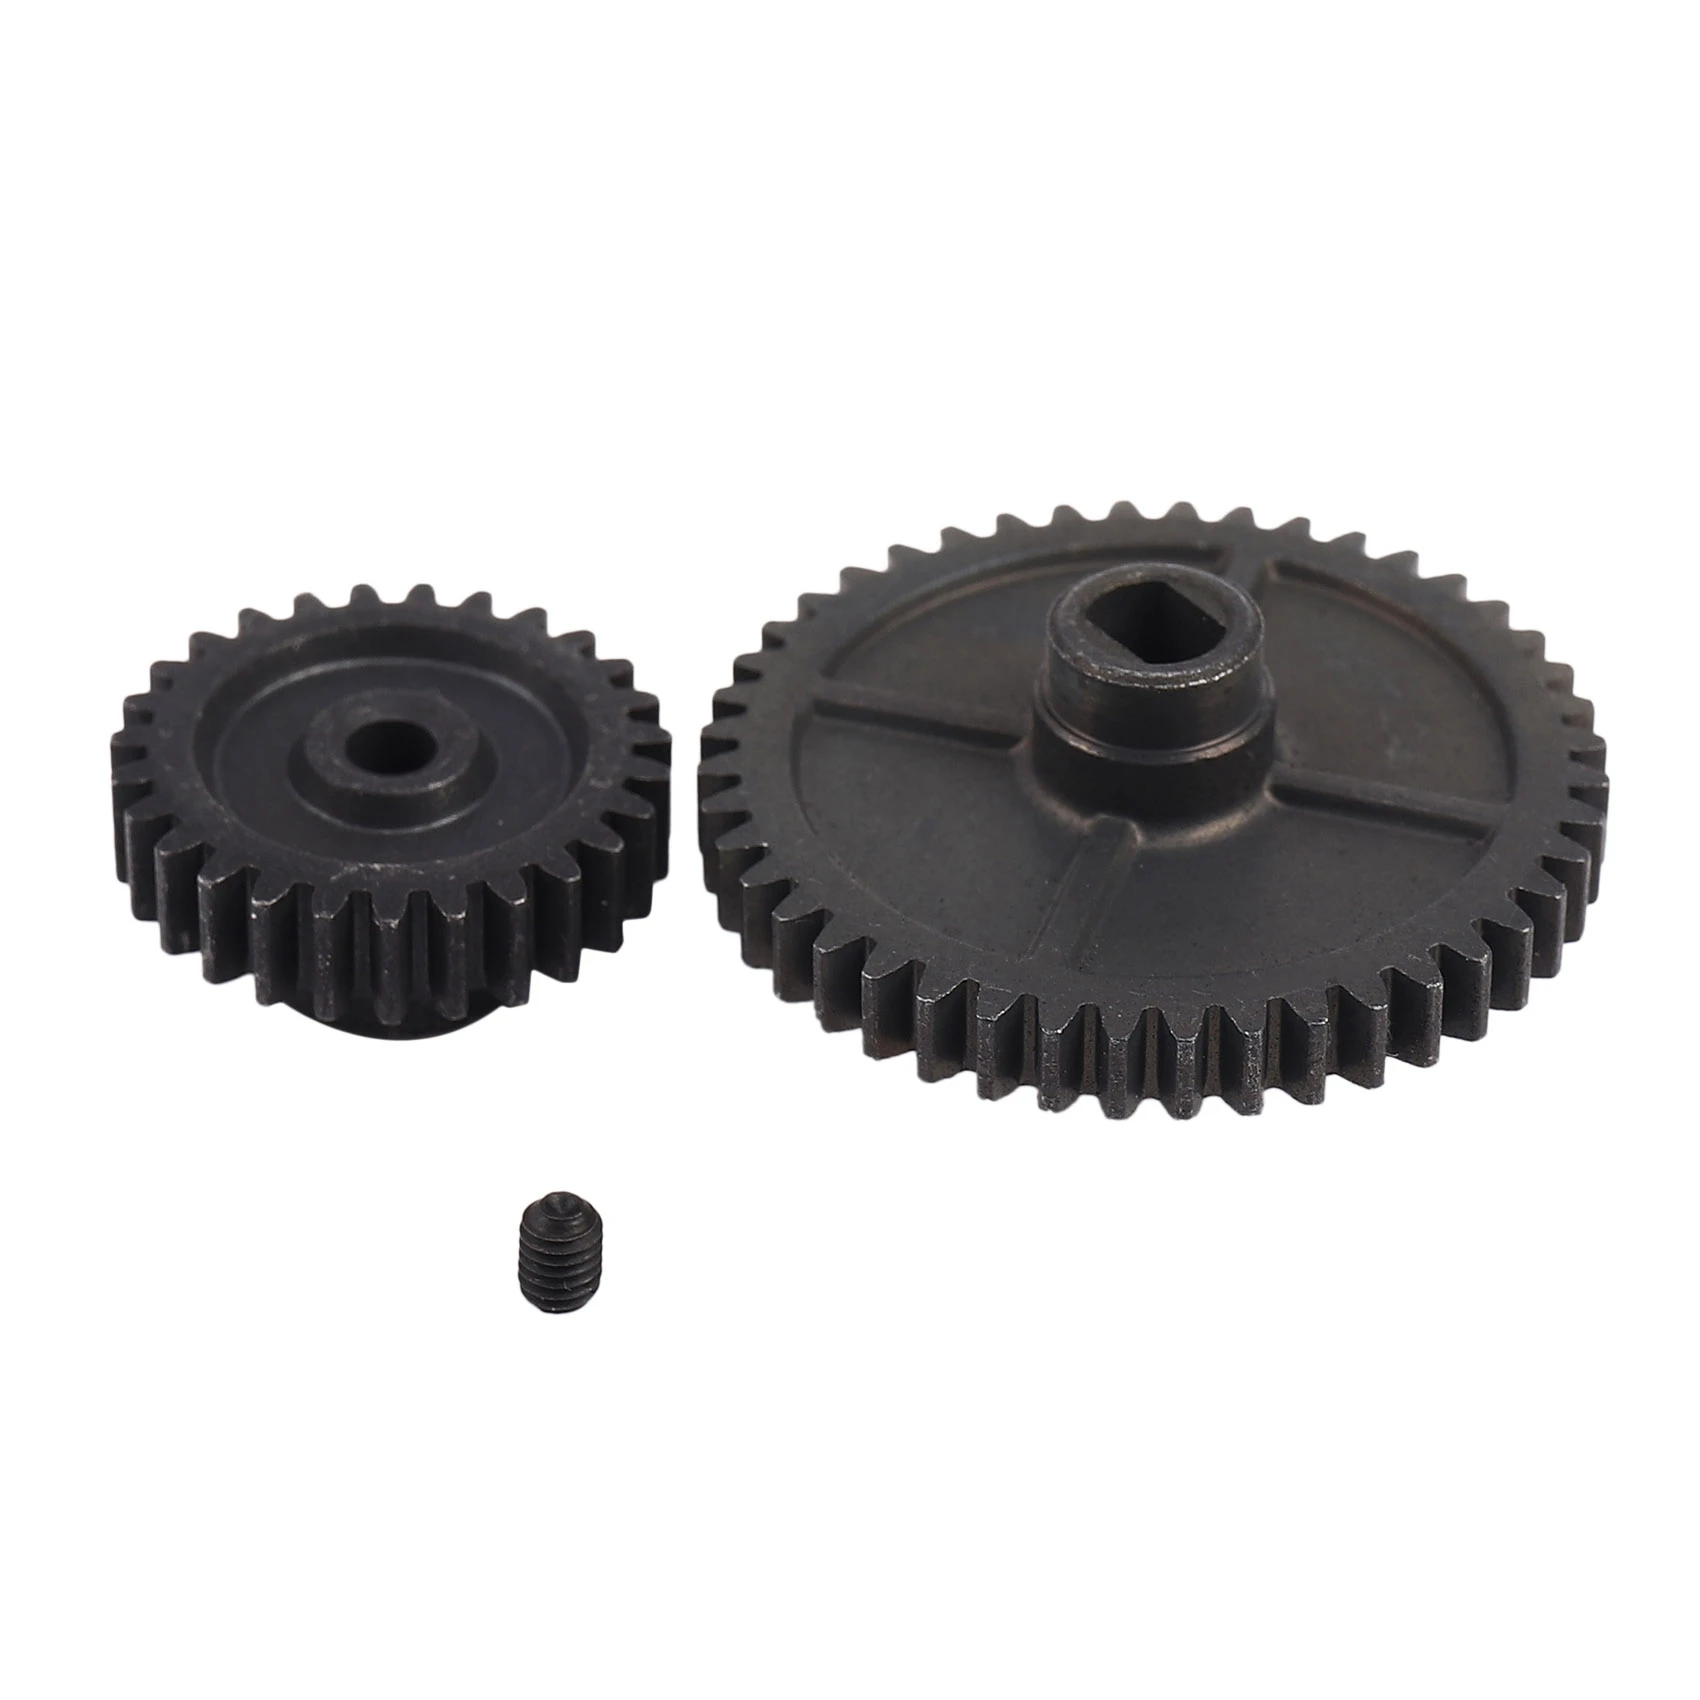 

Upgrade Metal Reduction Gear Motor Gear for Wltoys 144001 1/14 RC Car Parts